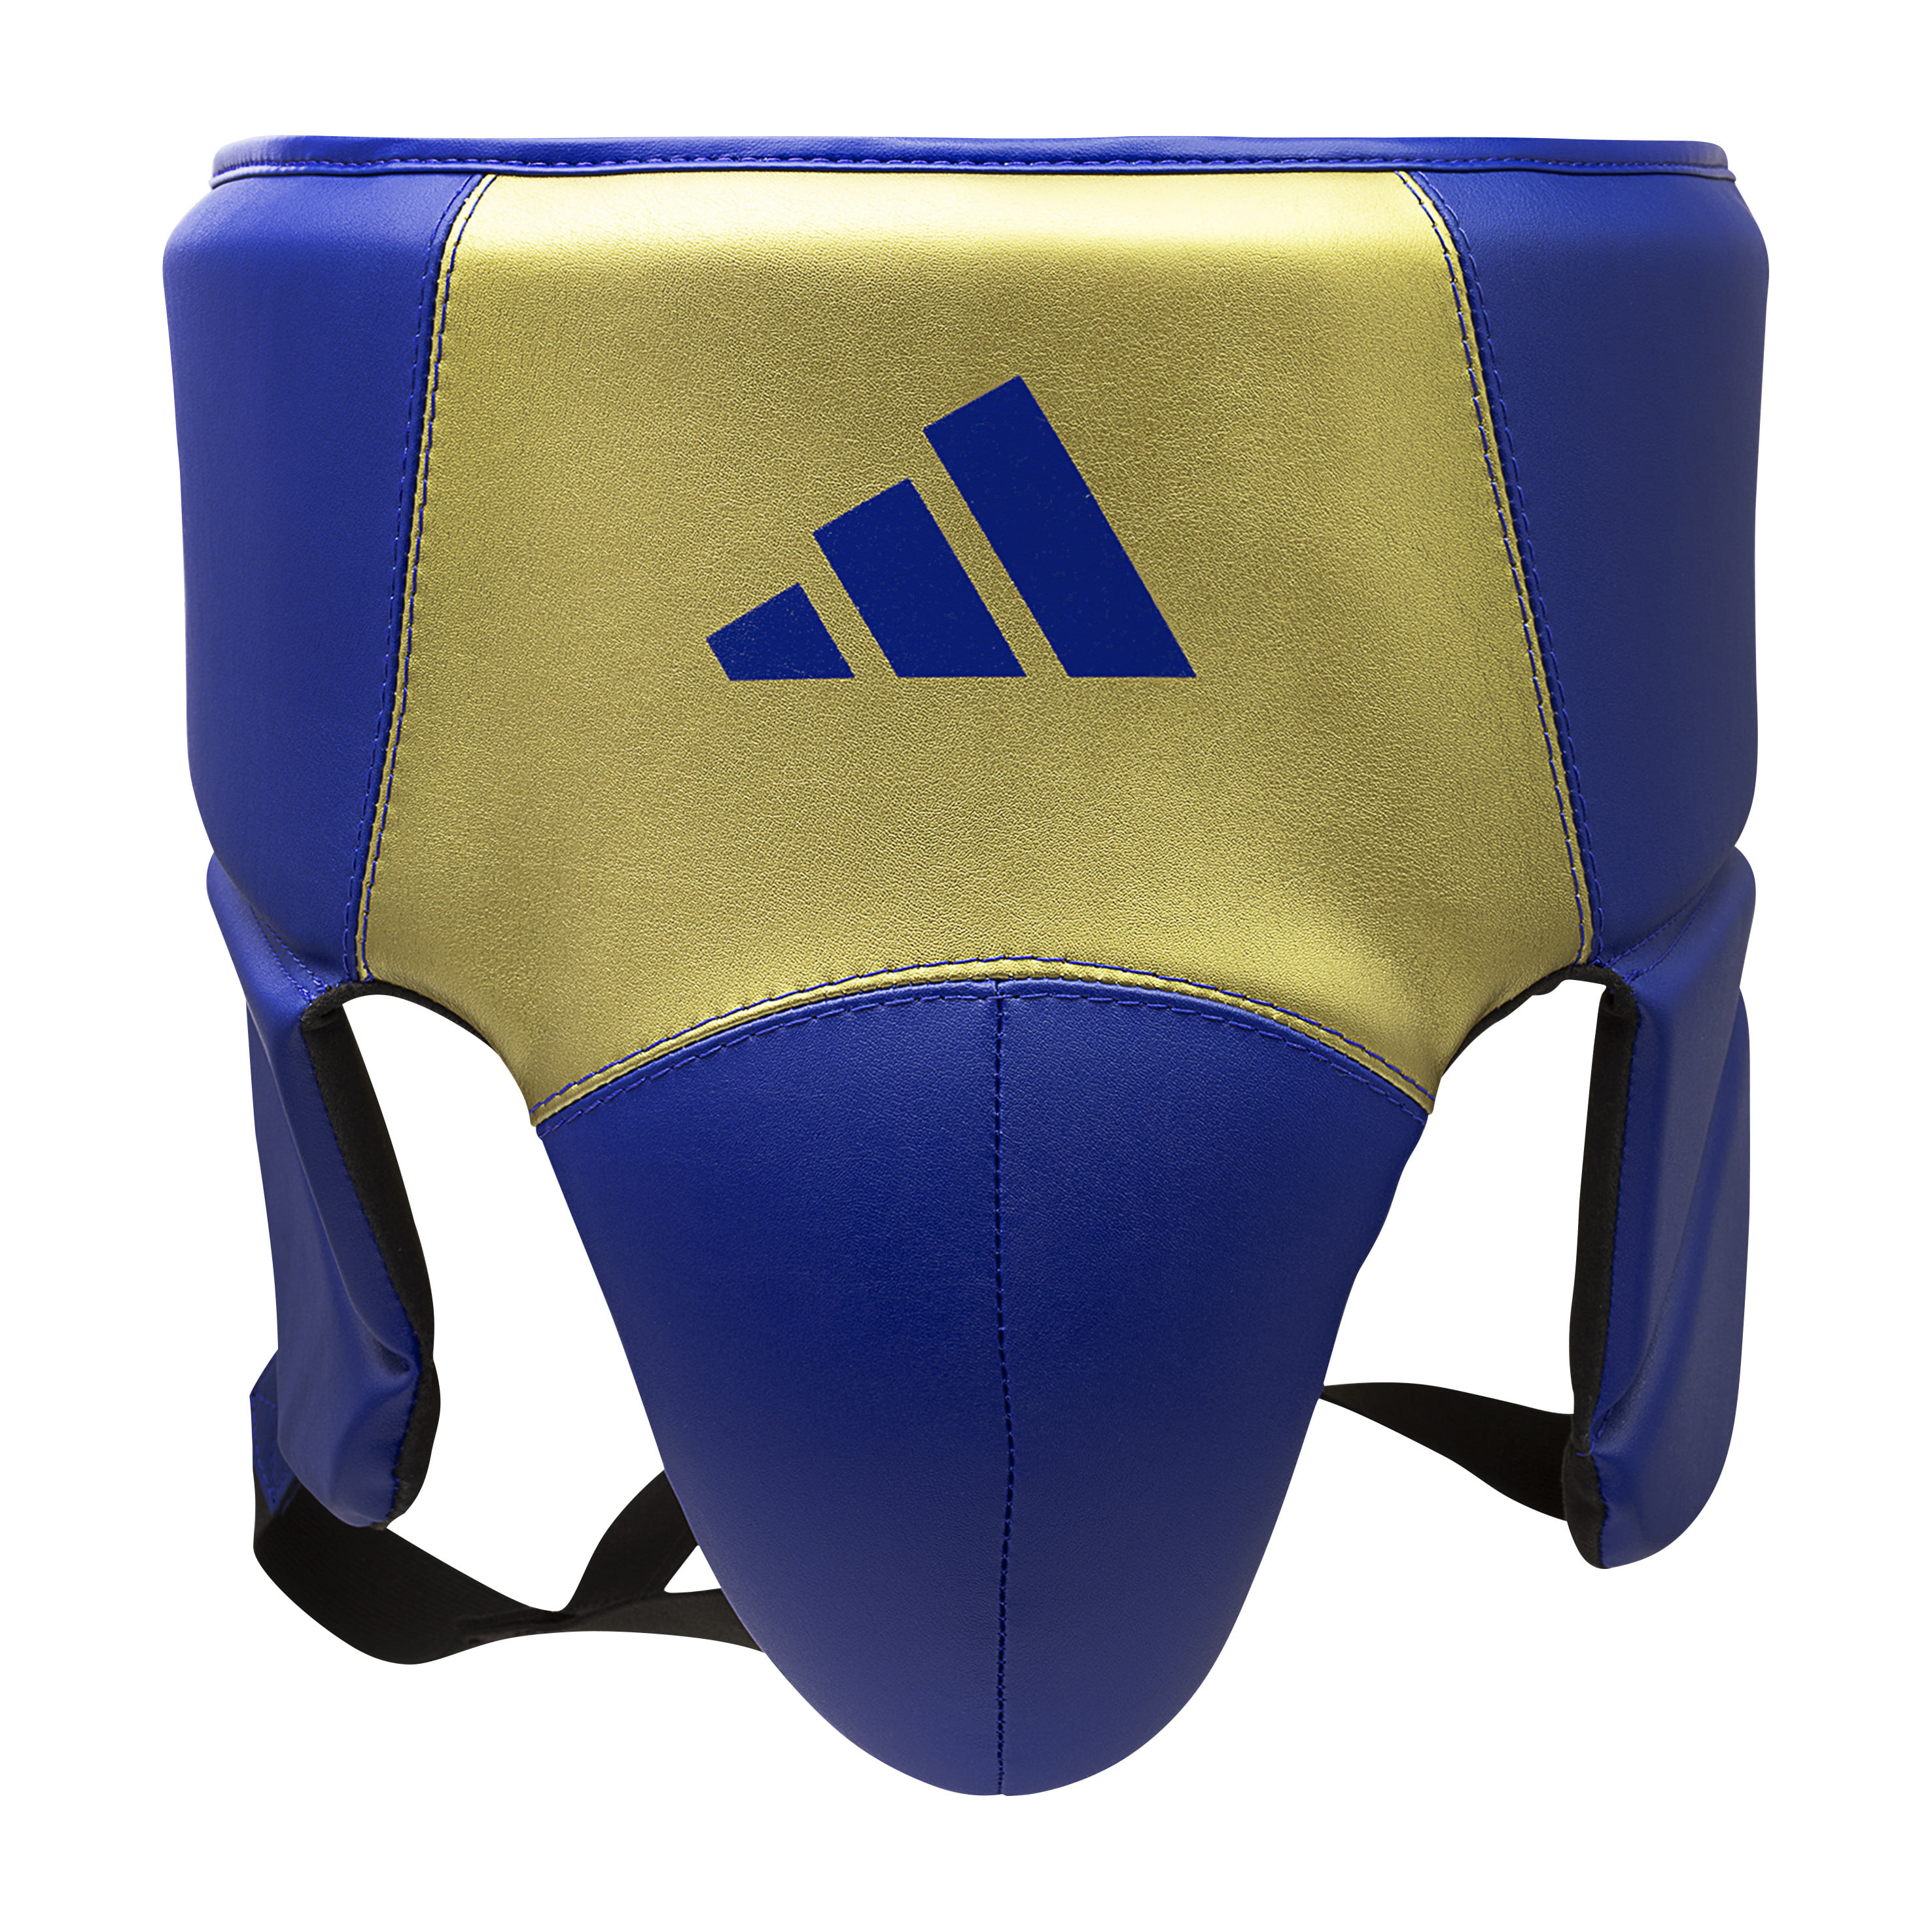 Pro Speed Groin Guard - BLUE/GOLD